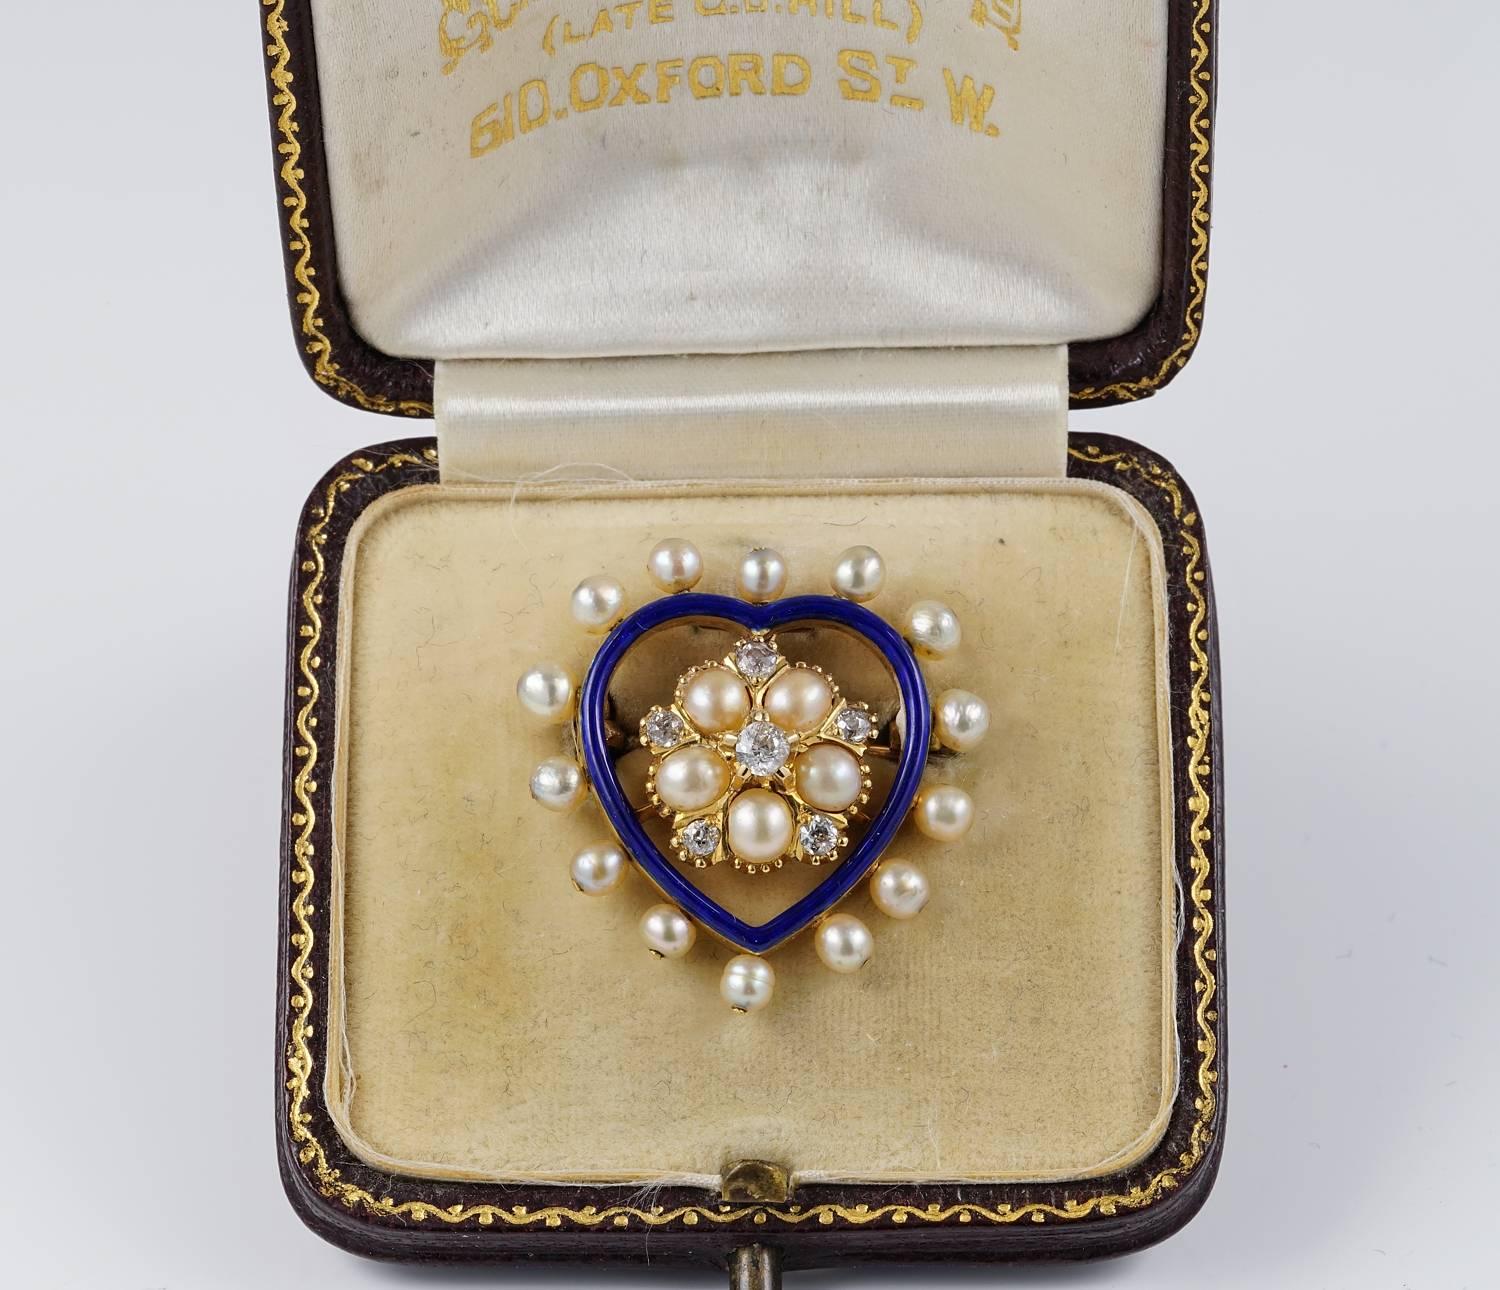 Victorian romanticism
The prettiest Victorian period heart brooch pendant crafted of solid 18 KT gold
A centre Diamond and natural pearl daisy under lined by Royal Blue enamelling in the shape of a heart fully framed by lovely baby 
Natural sea